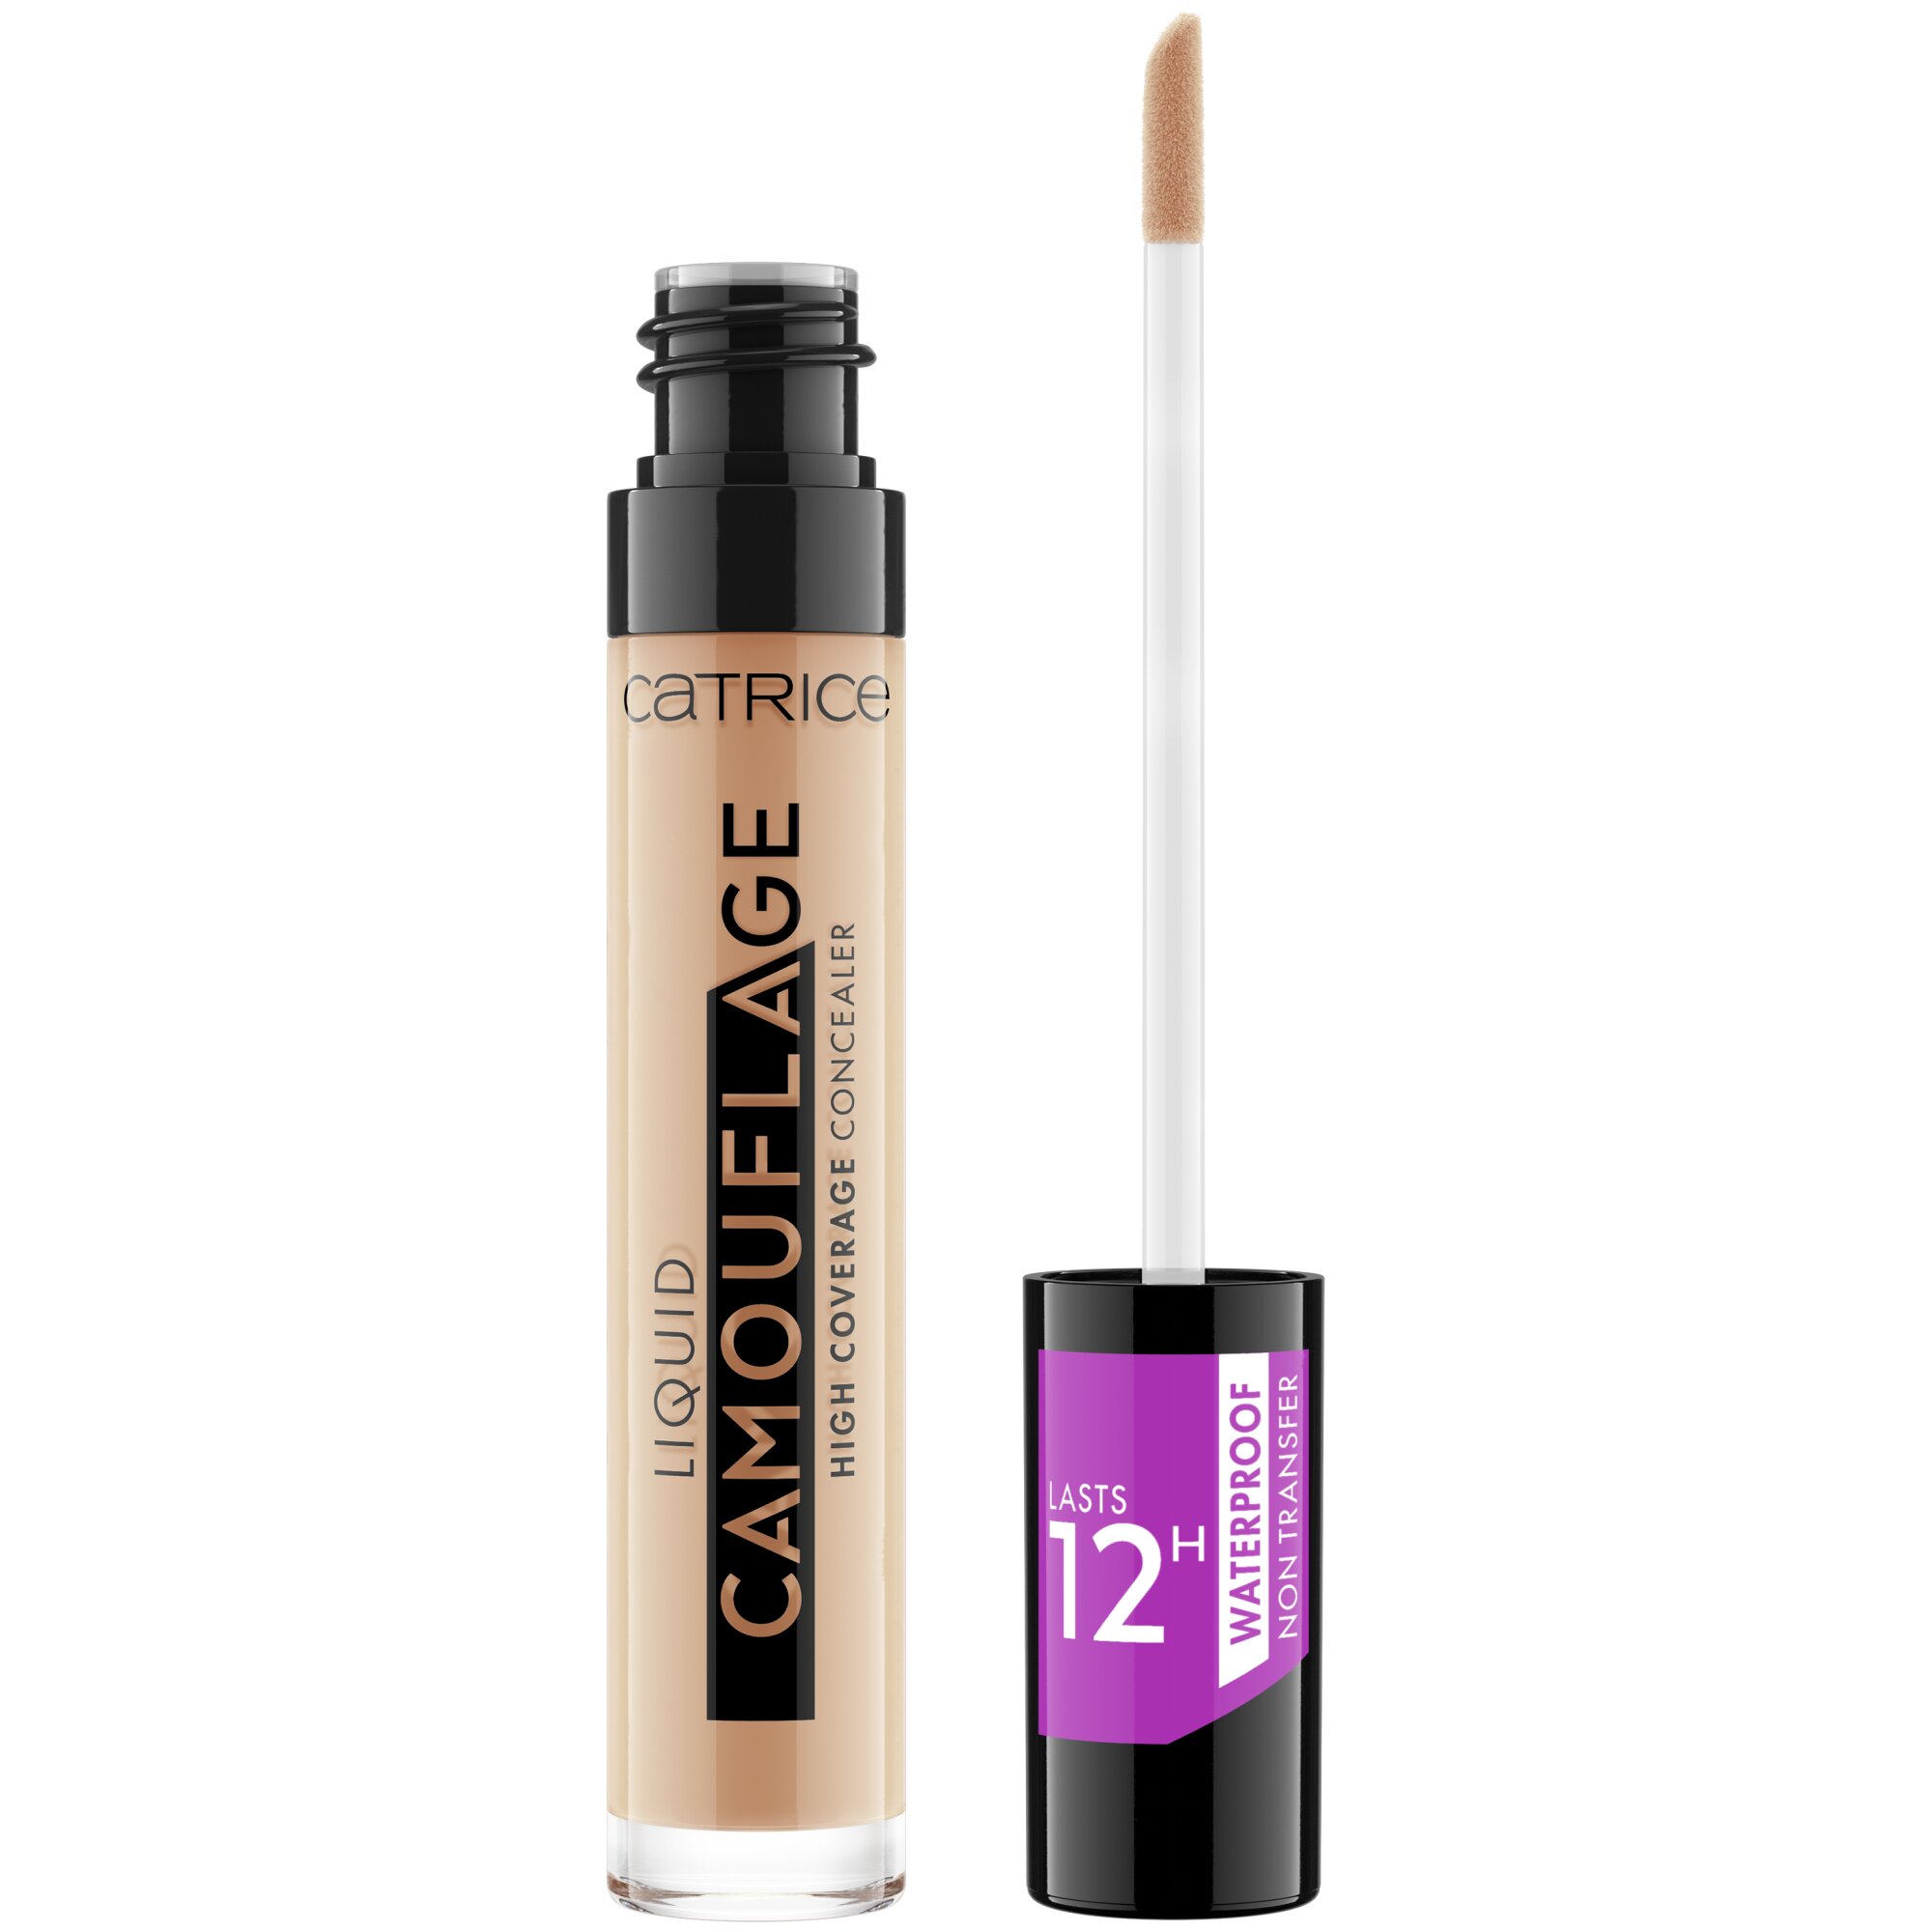 Corector lichid Camouflage High Coverage, Nuanta 015 - Honey, 5 ml, Catrice